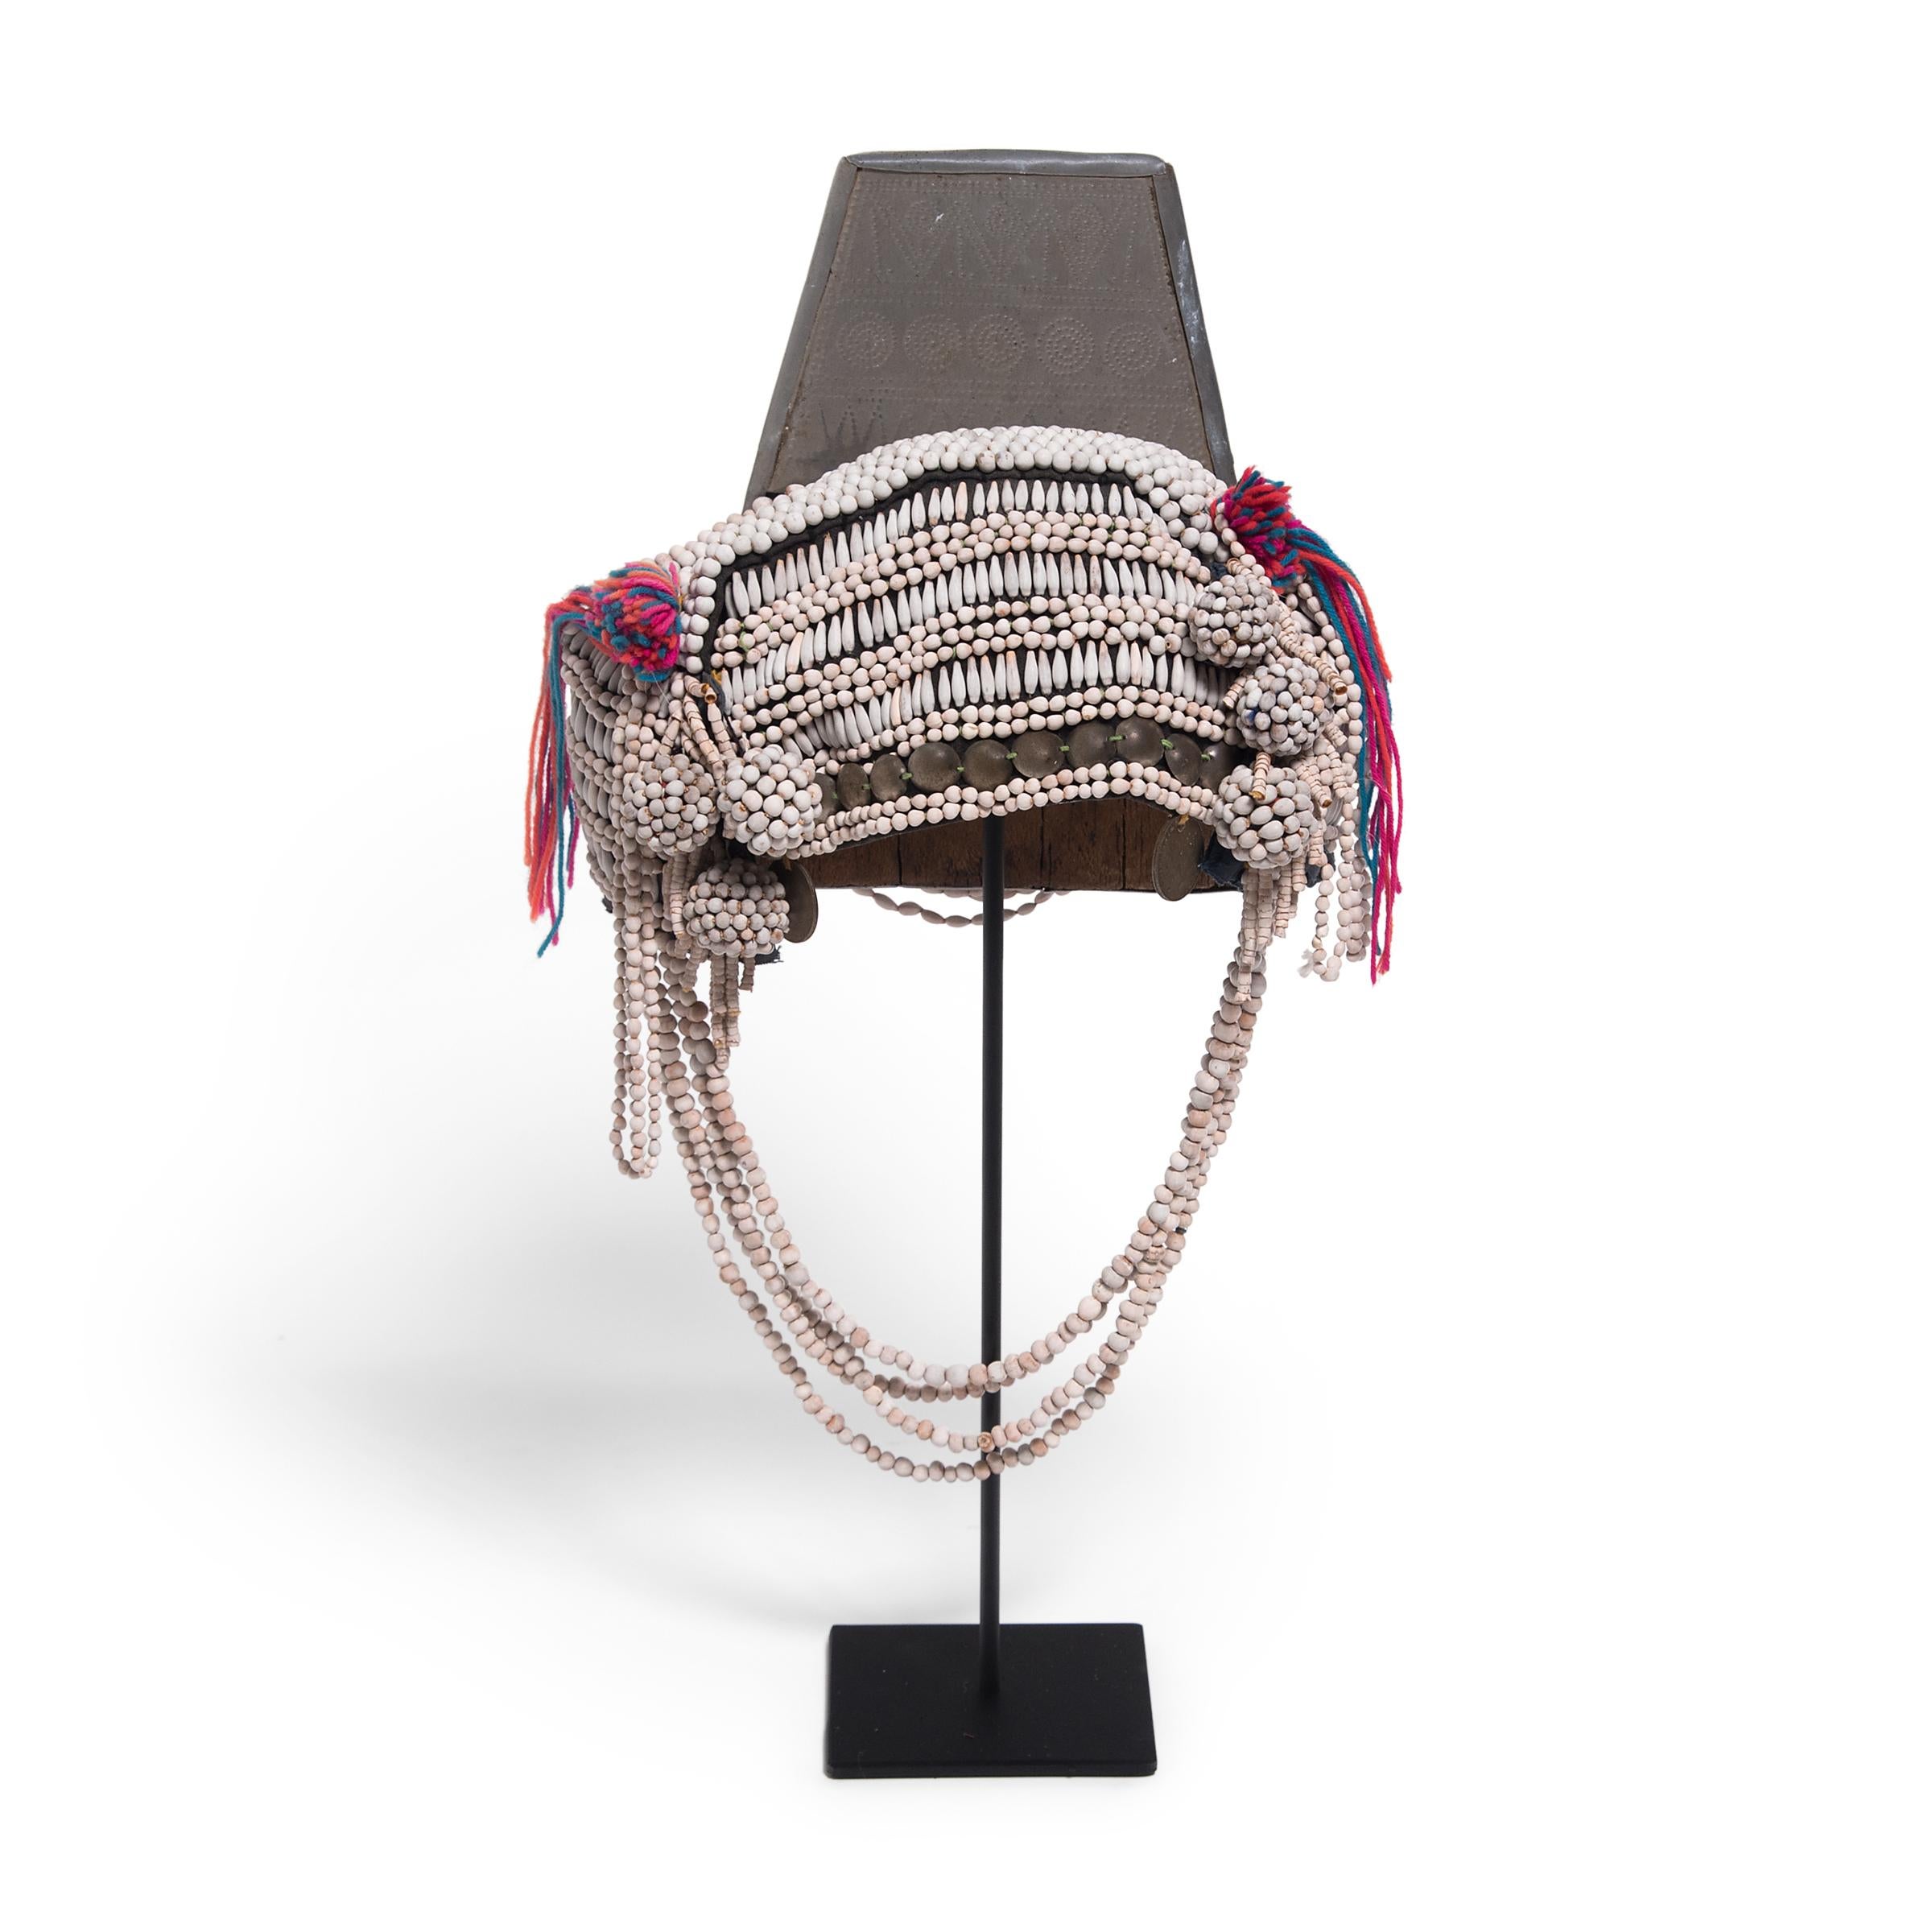 Worn to indicate her age and marital status, this densely beaded headdress was part of the daily attire of an Akha woman of Southeast Asia. As much an expression of individual style as it is a measure of social standing, the Akha headdress is